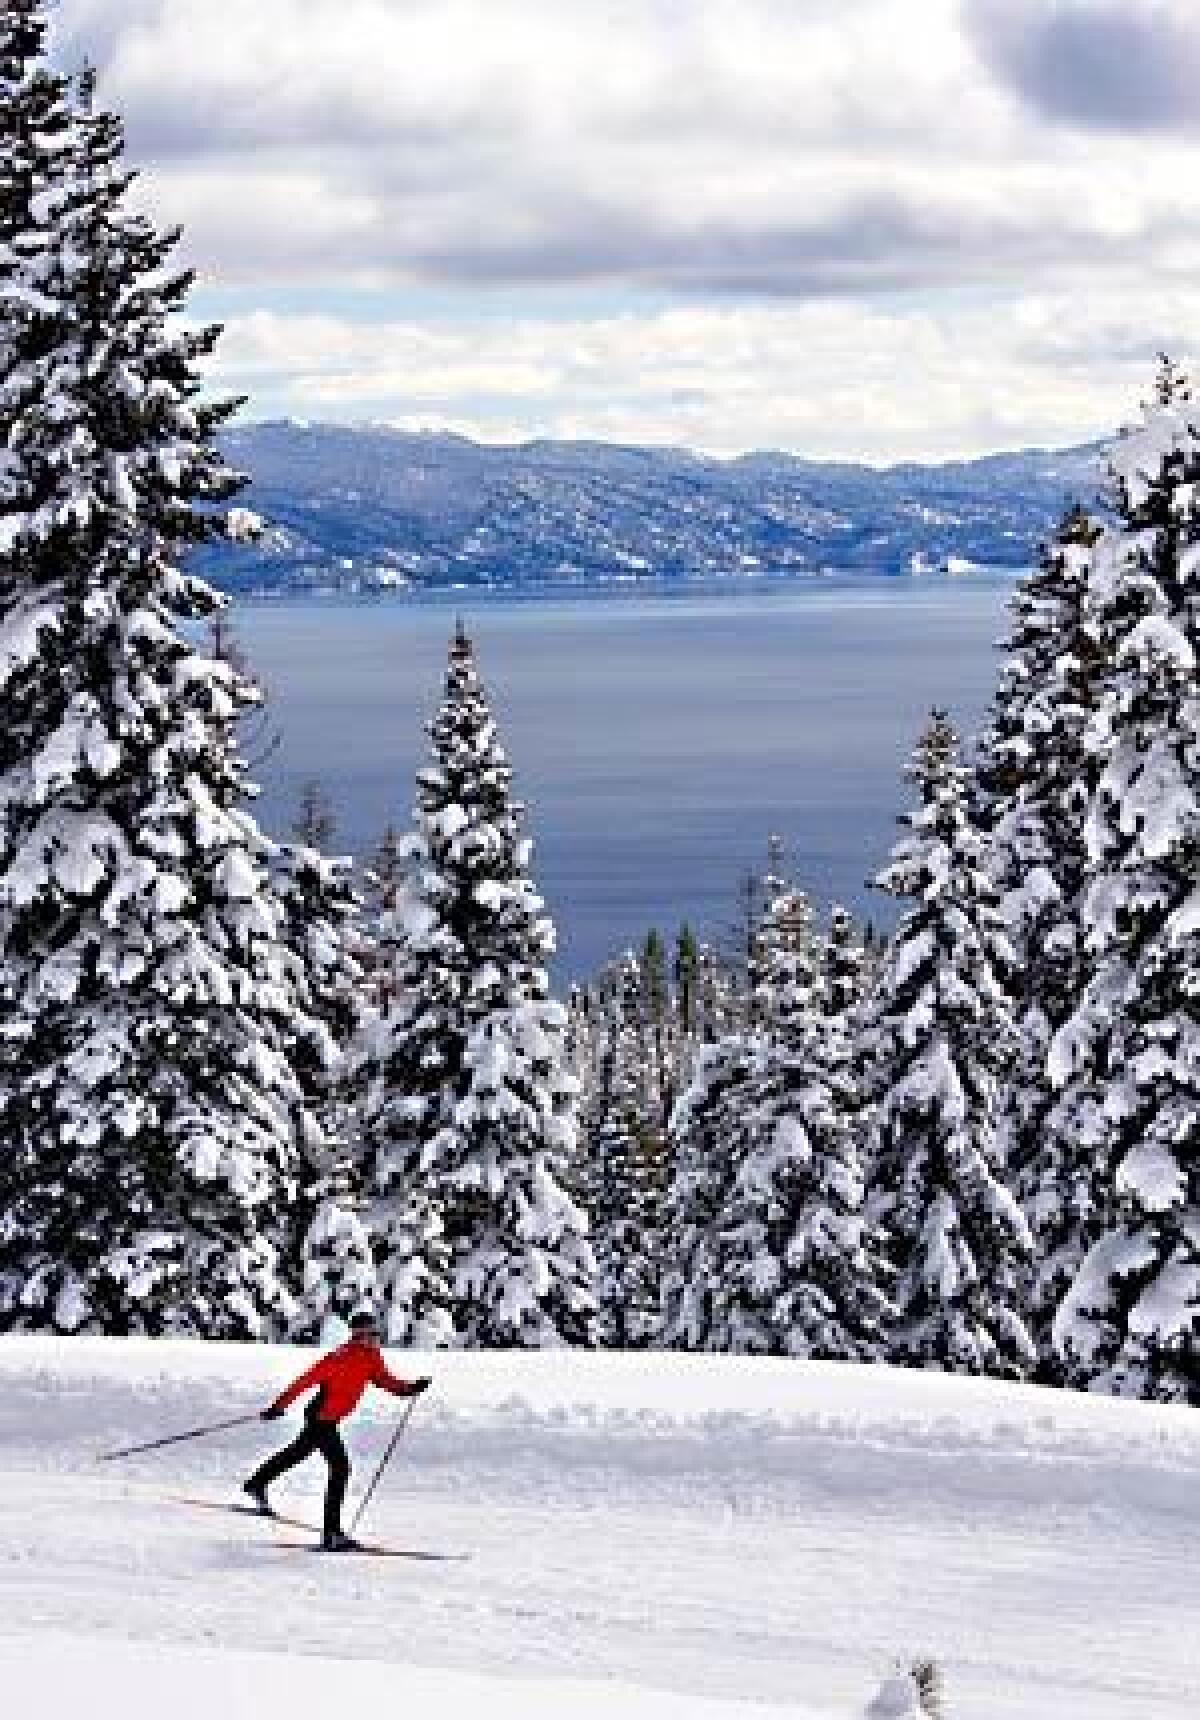 A cross-country skier strides on a trail at Northstar overlooking Lake Tahoe.